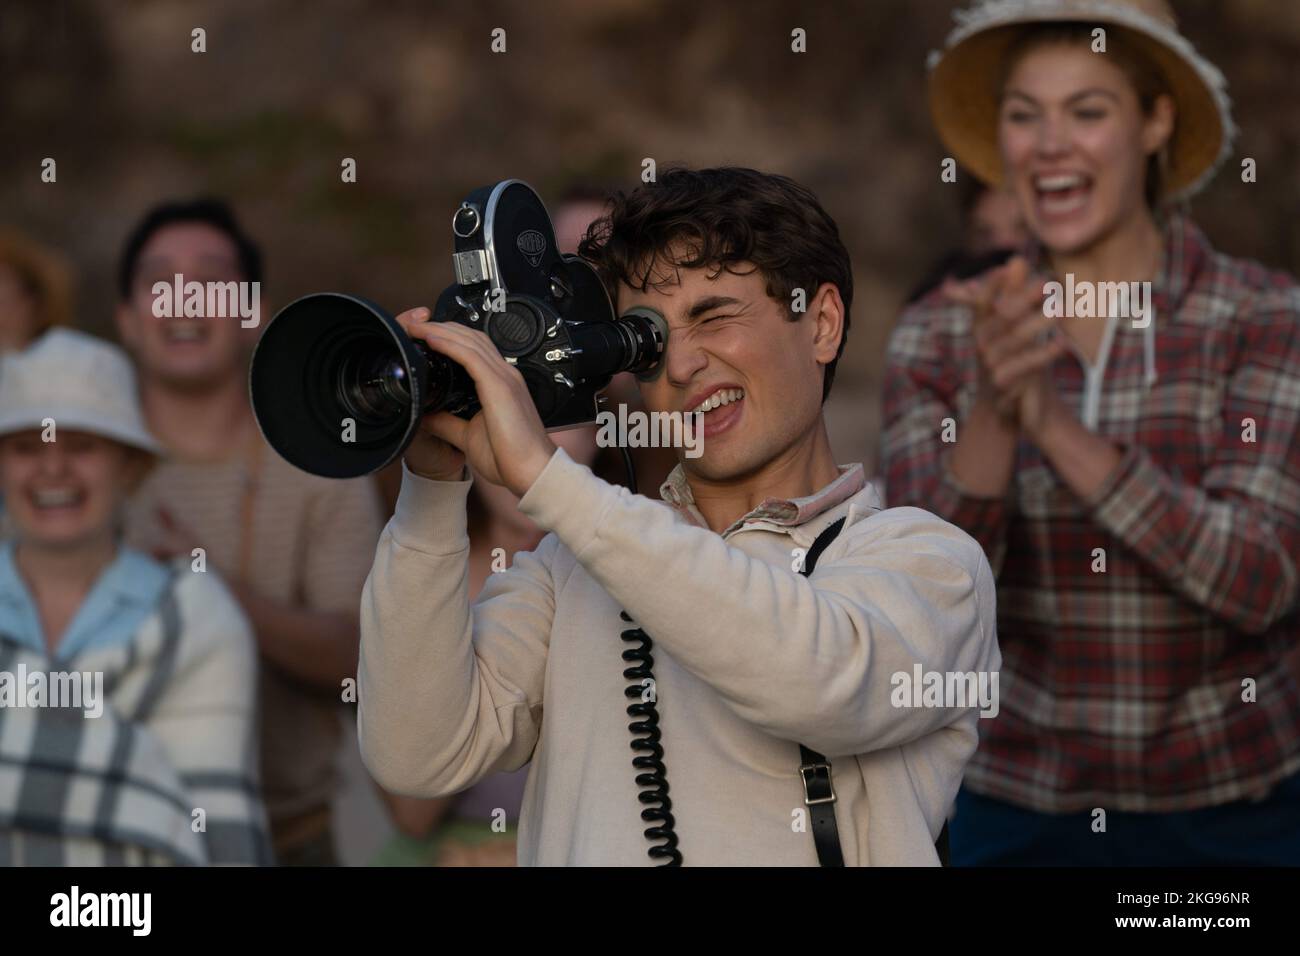 Gabriel LaBelle as Sammy Fabelman in 'The Fabelmans' (2022), co-written, produced and directed by Steven Spielberg. Photo credit: Merie Weismiller Wallace/Universal Pictures Stock Photo